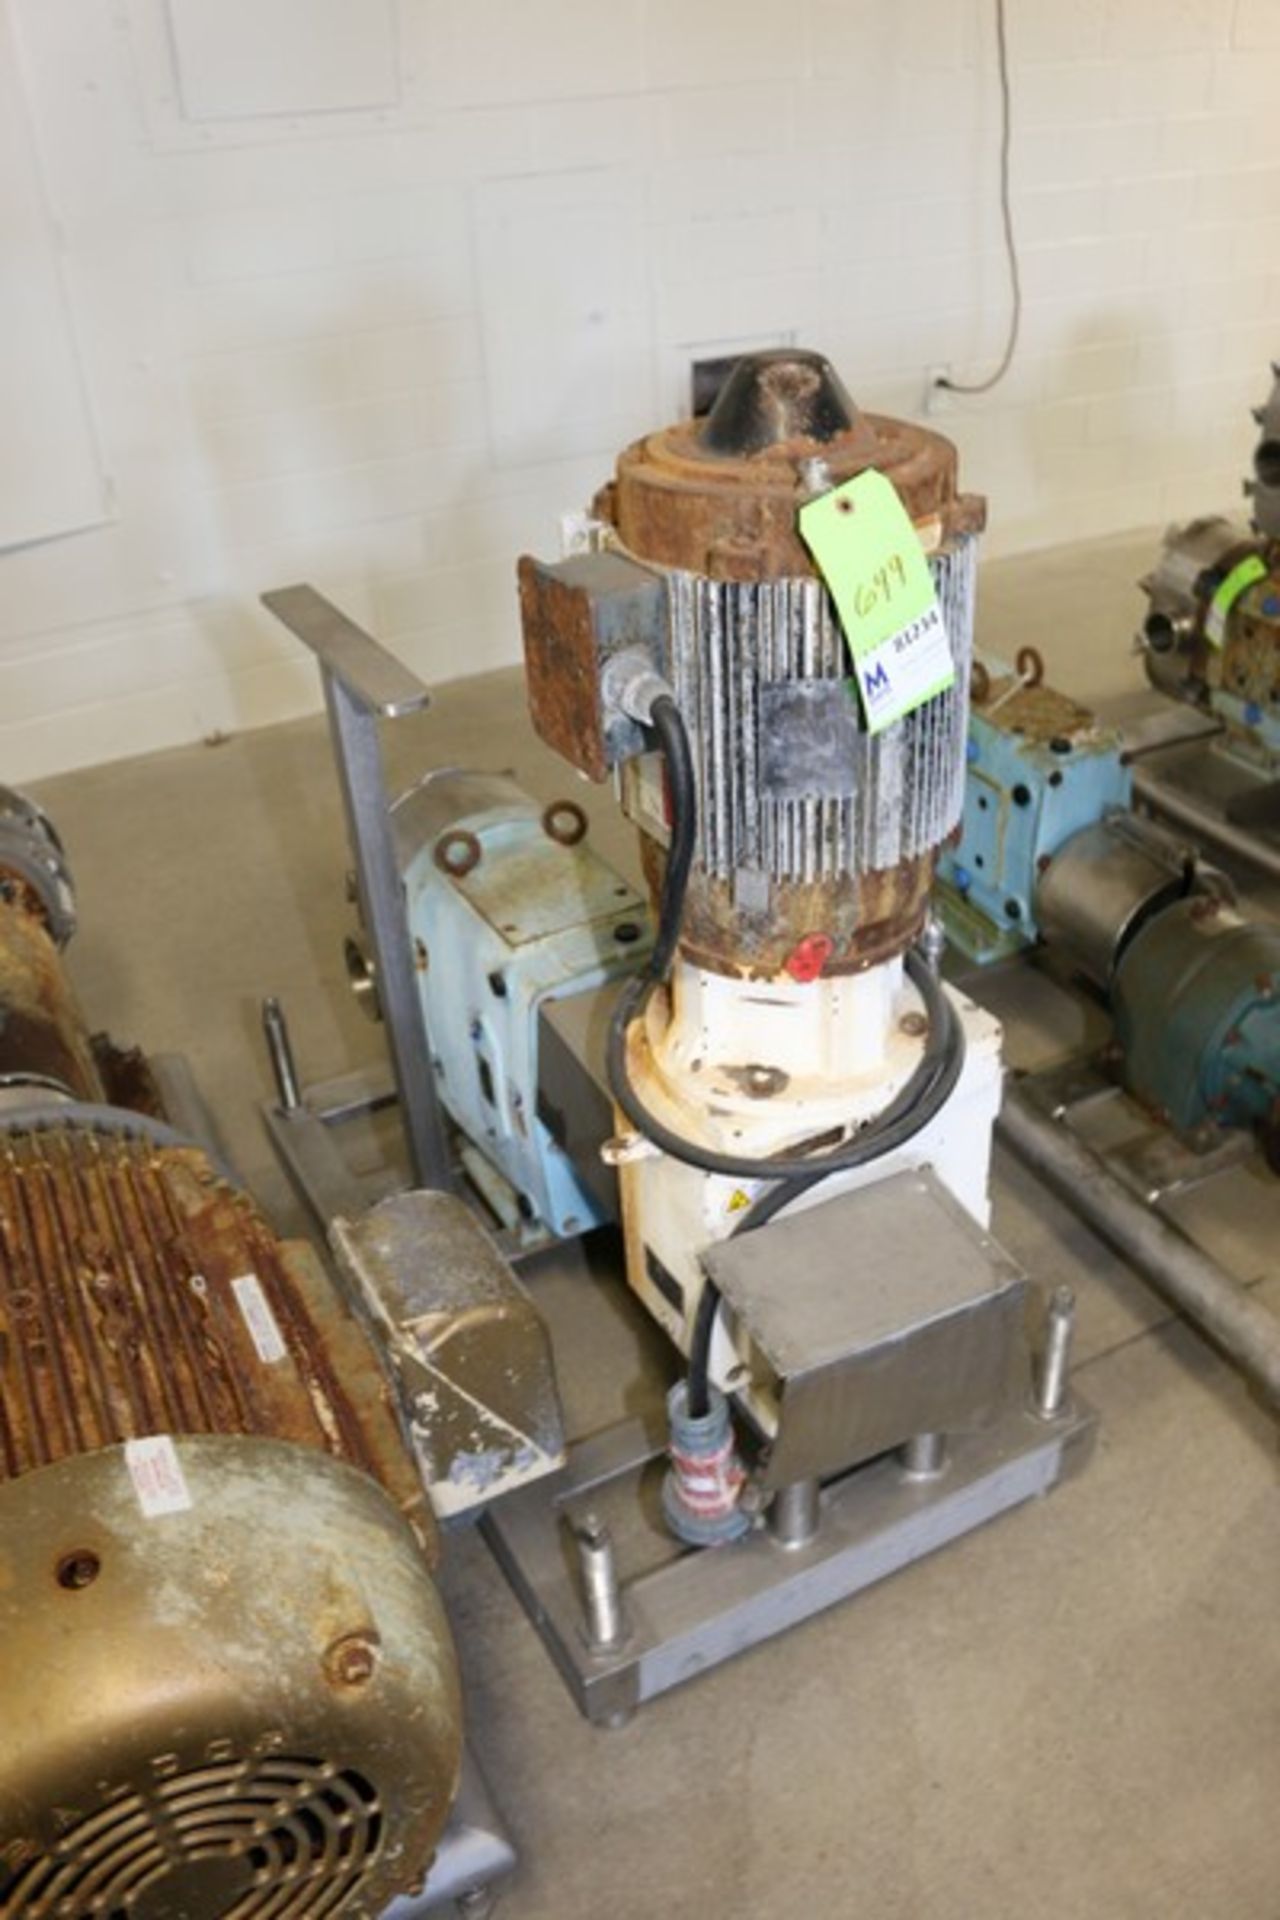 2014 SPX 7.5 hp Positive Displacement Pump, M/N 220U1, S/N 2971961-R1-3, 230/460 Volts, 3 Phase, - Image 8 of 8